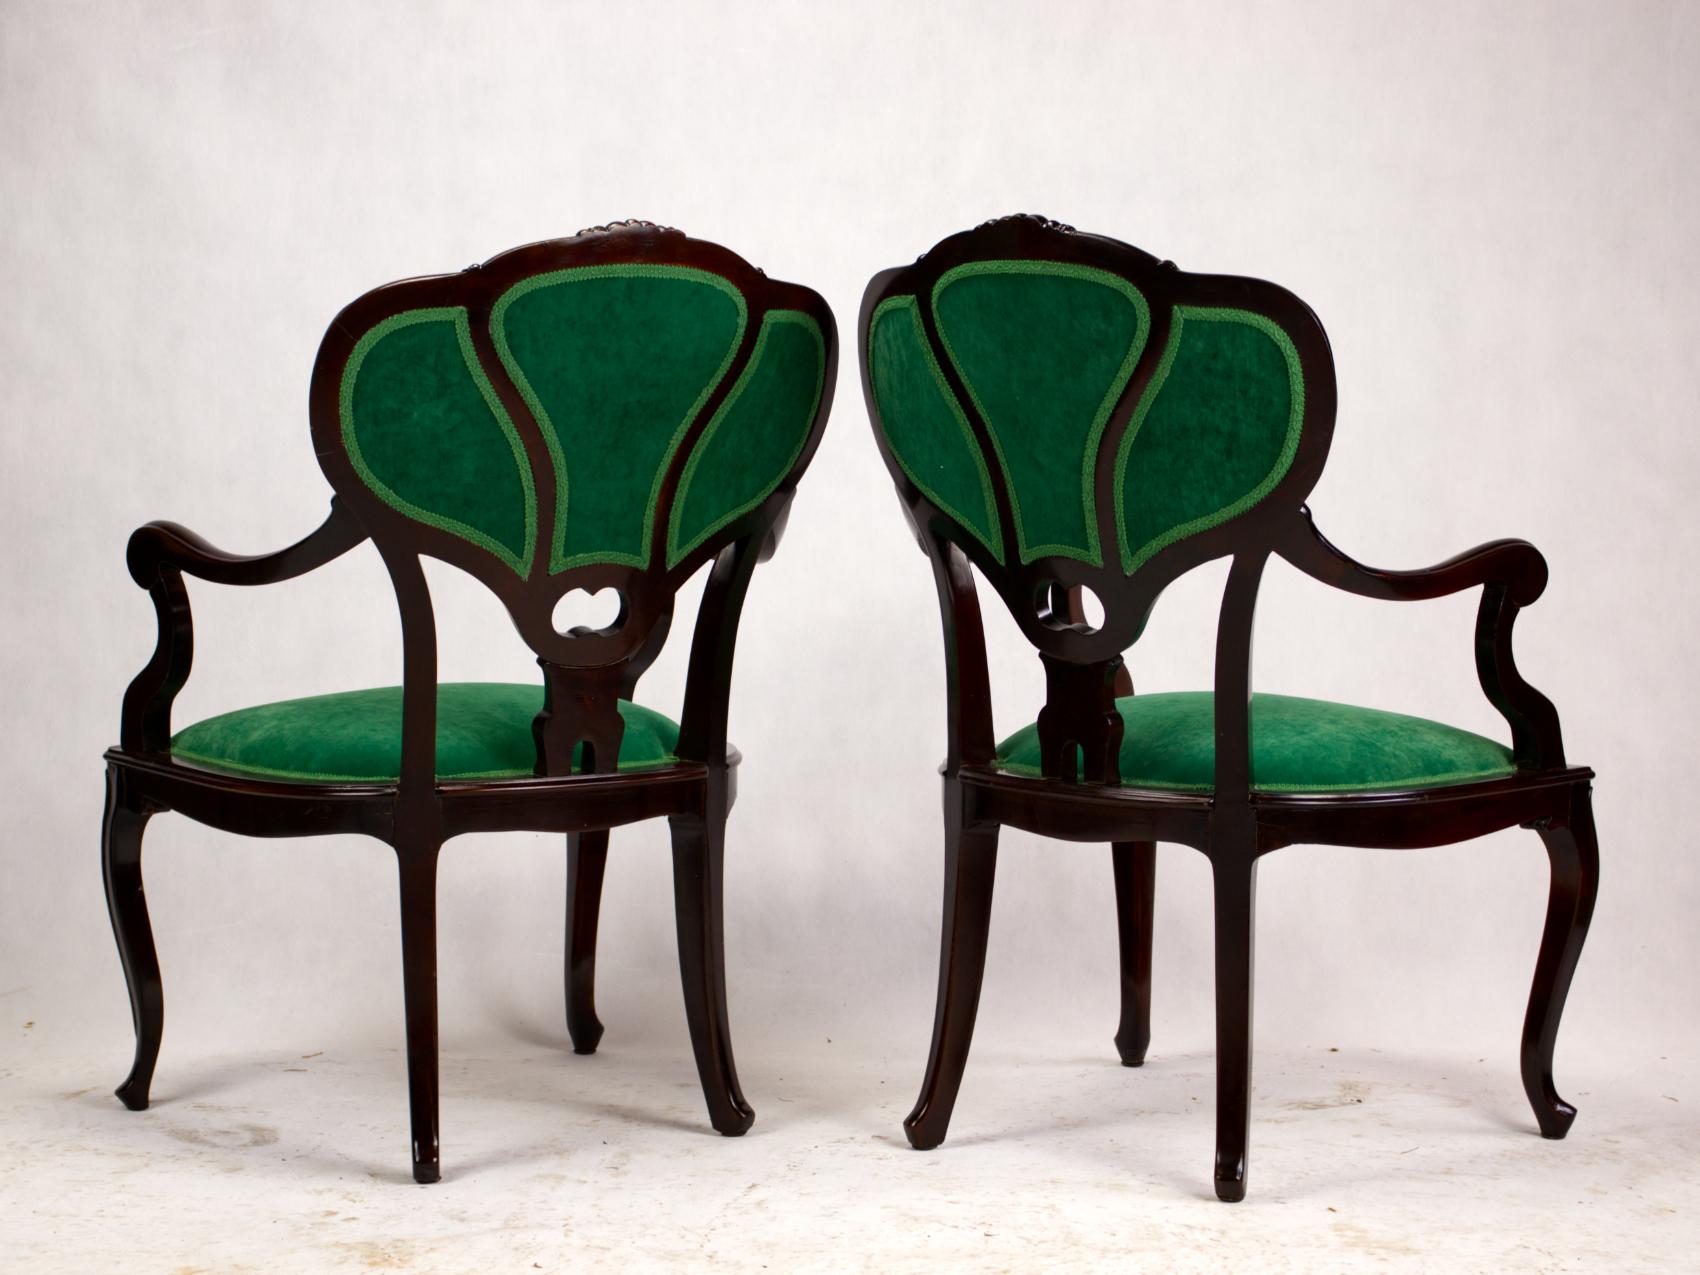 Hand-Carved Set of Three Hand Carved Art Nouveau Chairs, circa 1900 For Sale